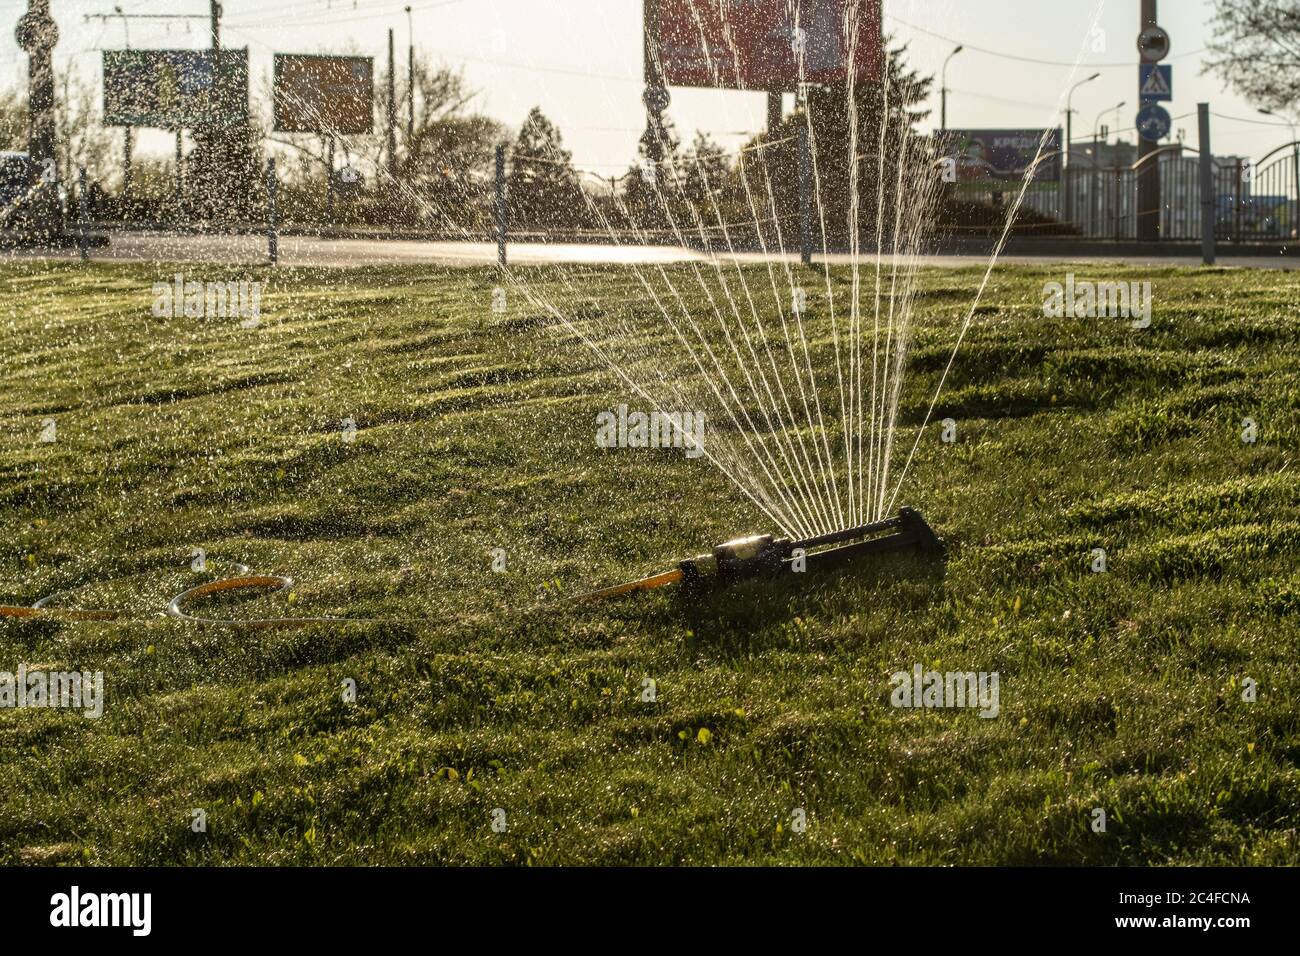 Portable, water efficient an oscillating sprinkler with metal arm sprays out a fan of water to the grass area in public streets. Watering lawn in city Stock Photo